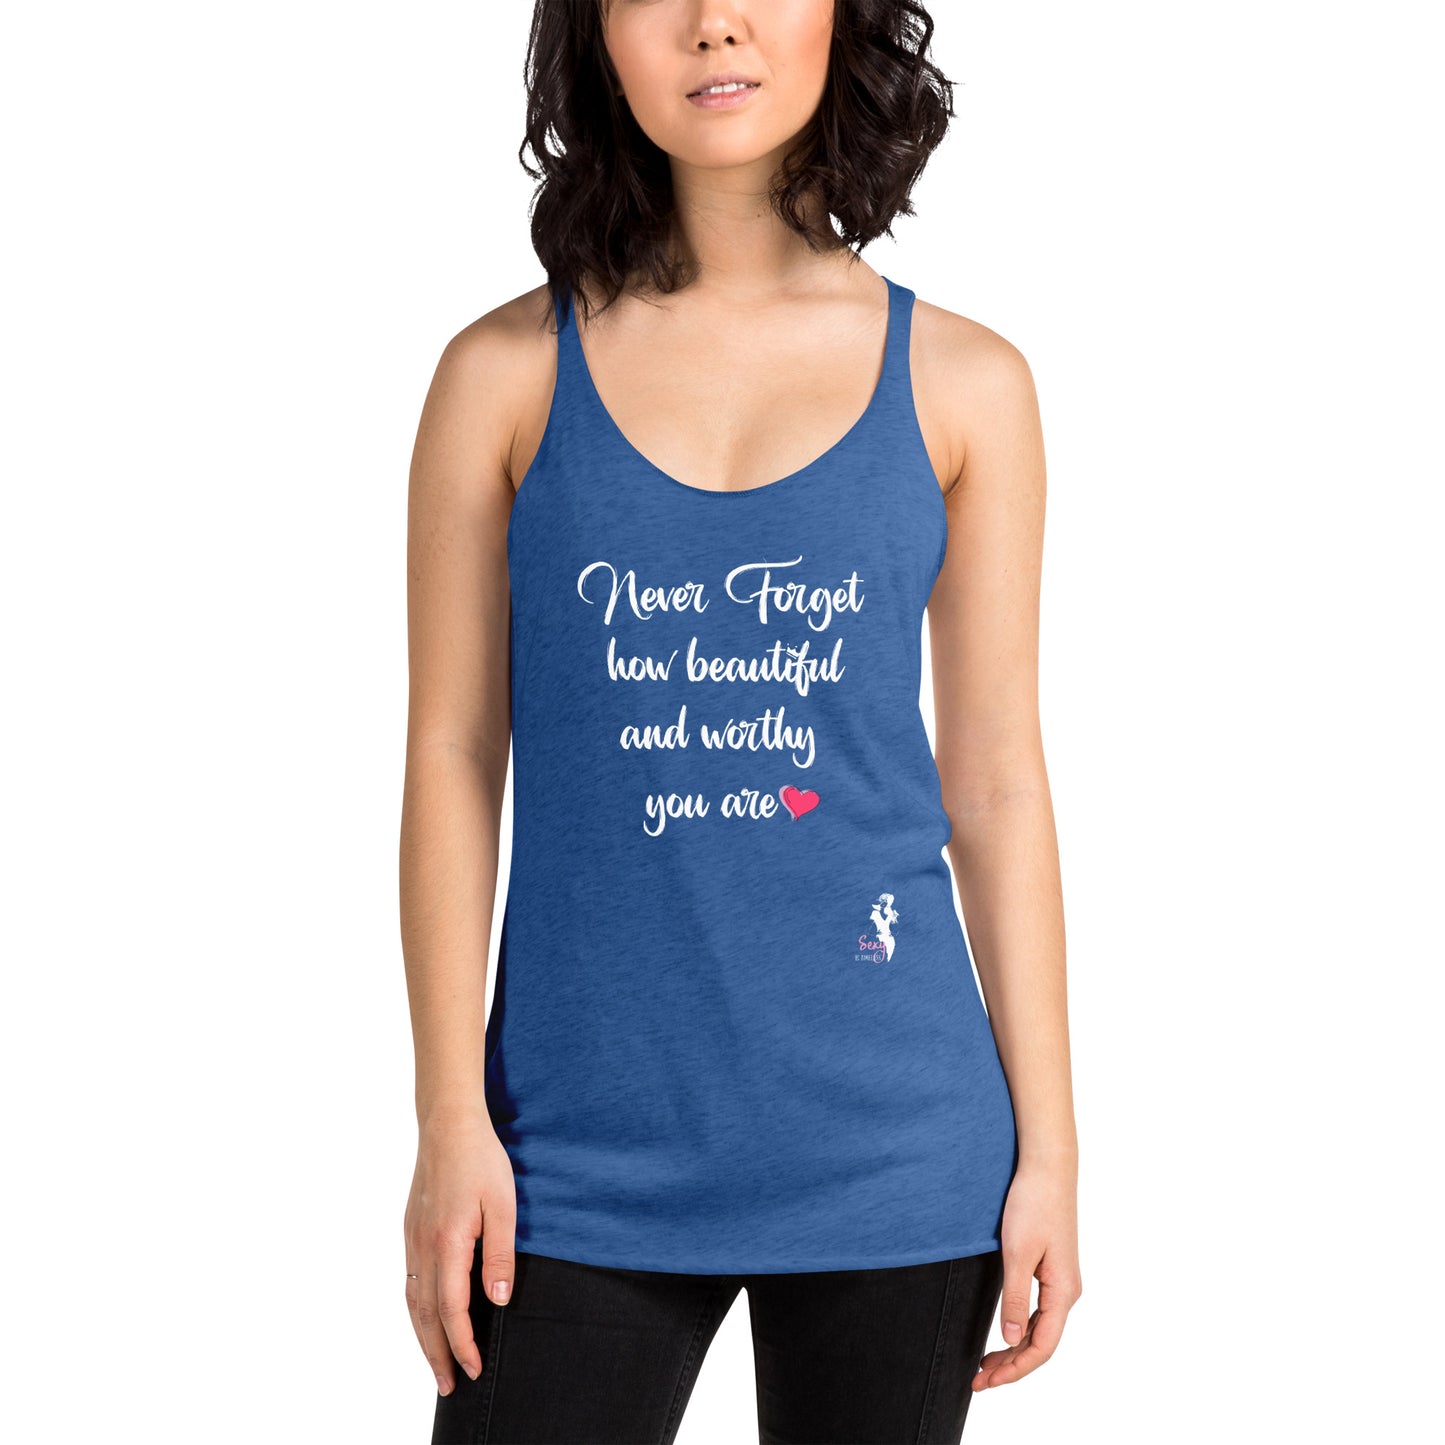 Women's Racerback Tank - Never forget - Different colors